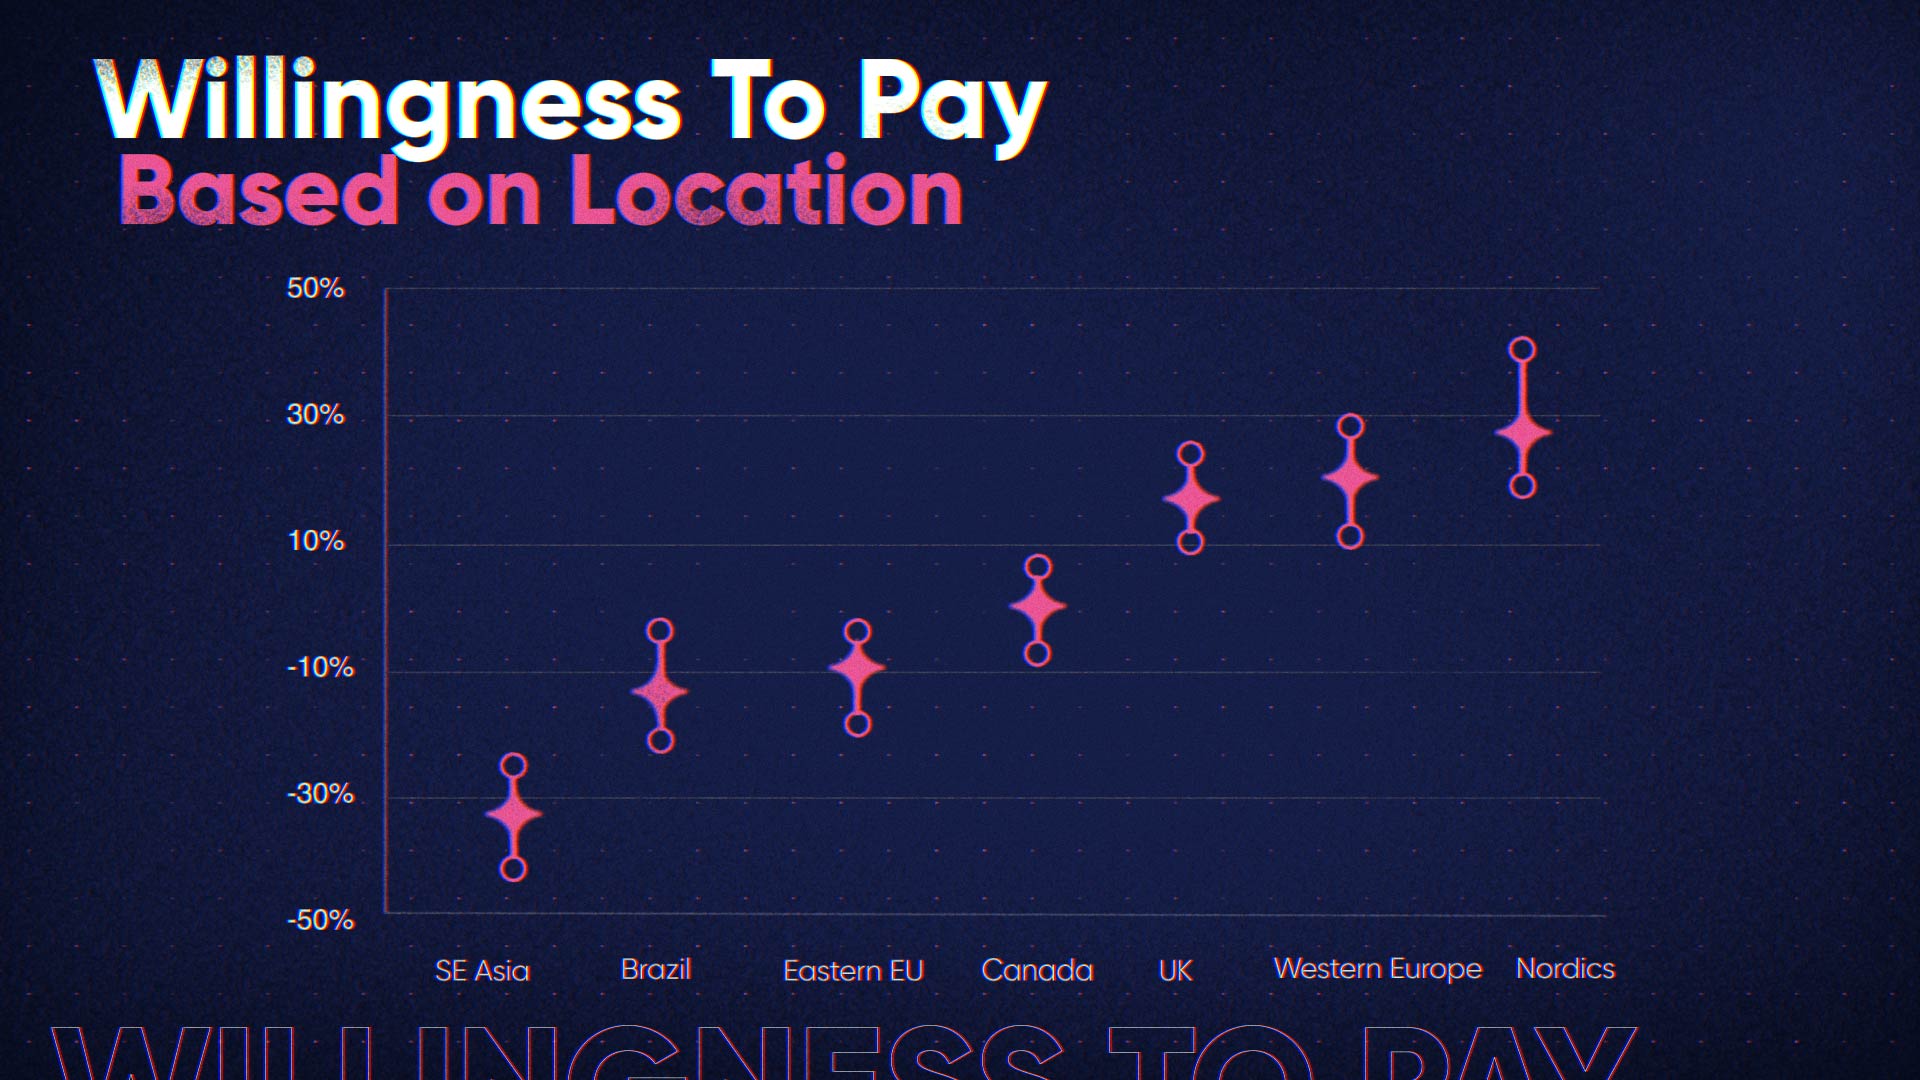 Willingness to Pay Based on Location can vary